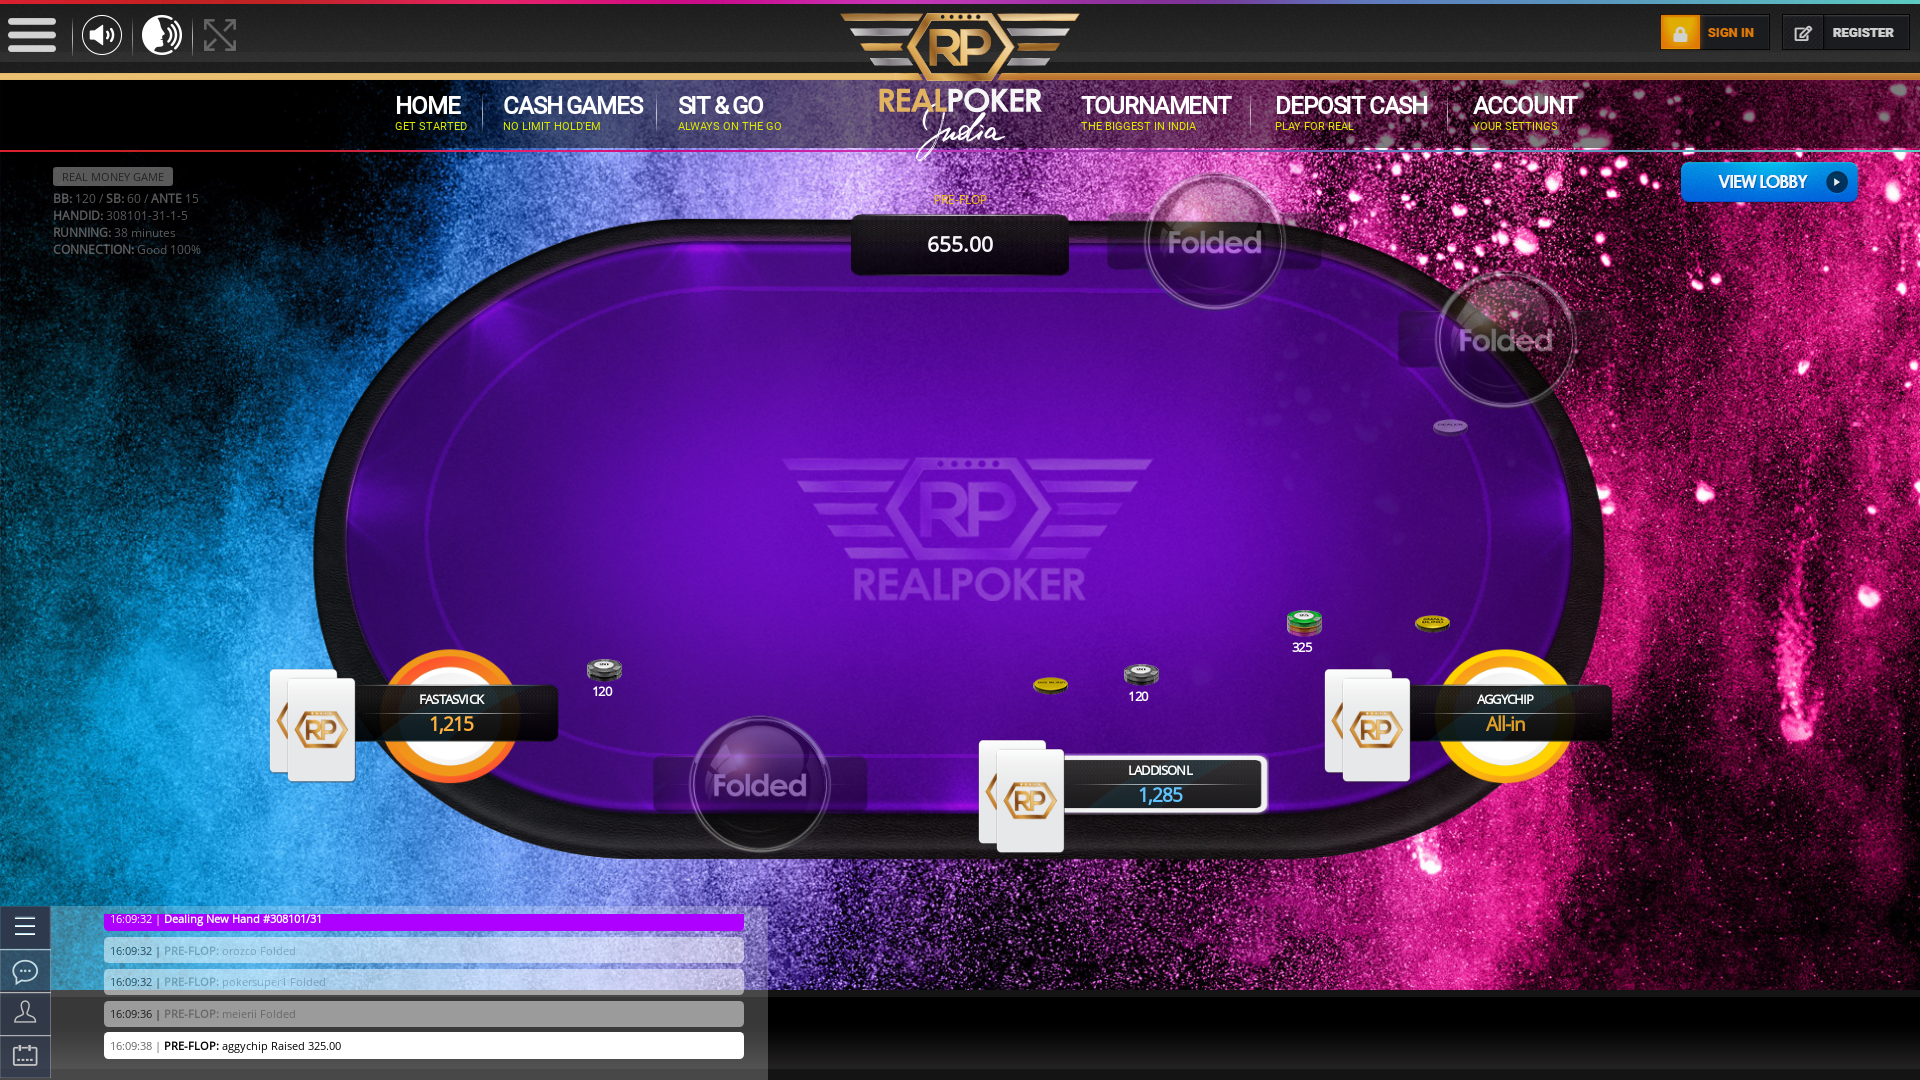 aggychip playing online poker on the Alaknanda, New Delhi table